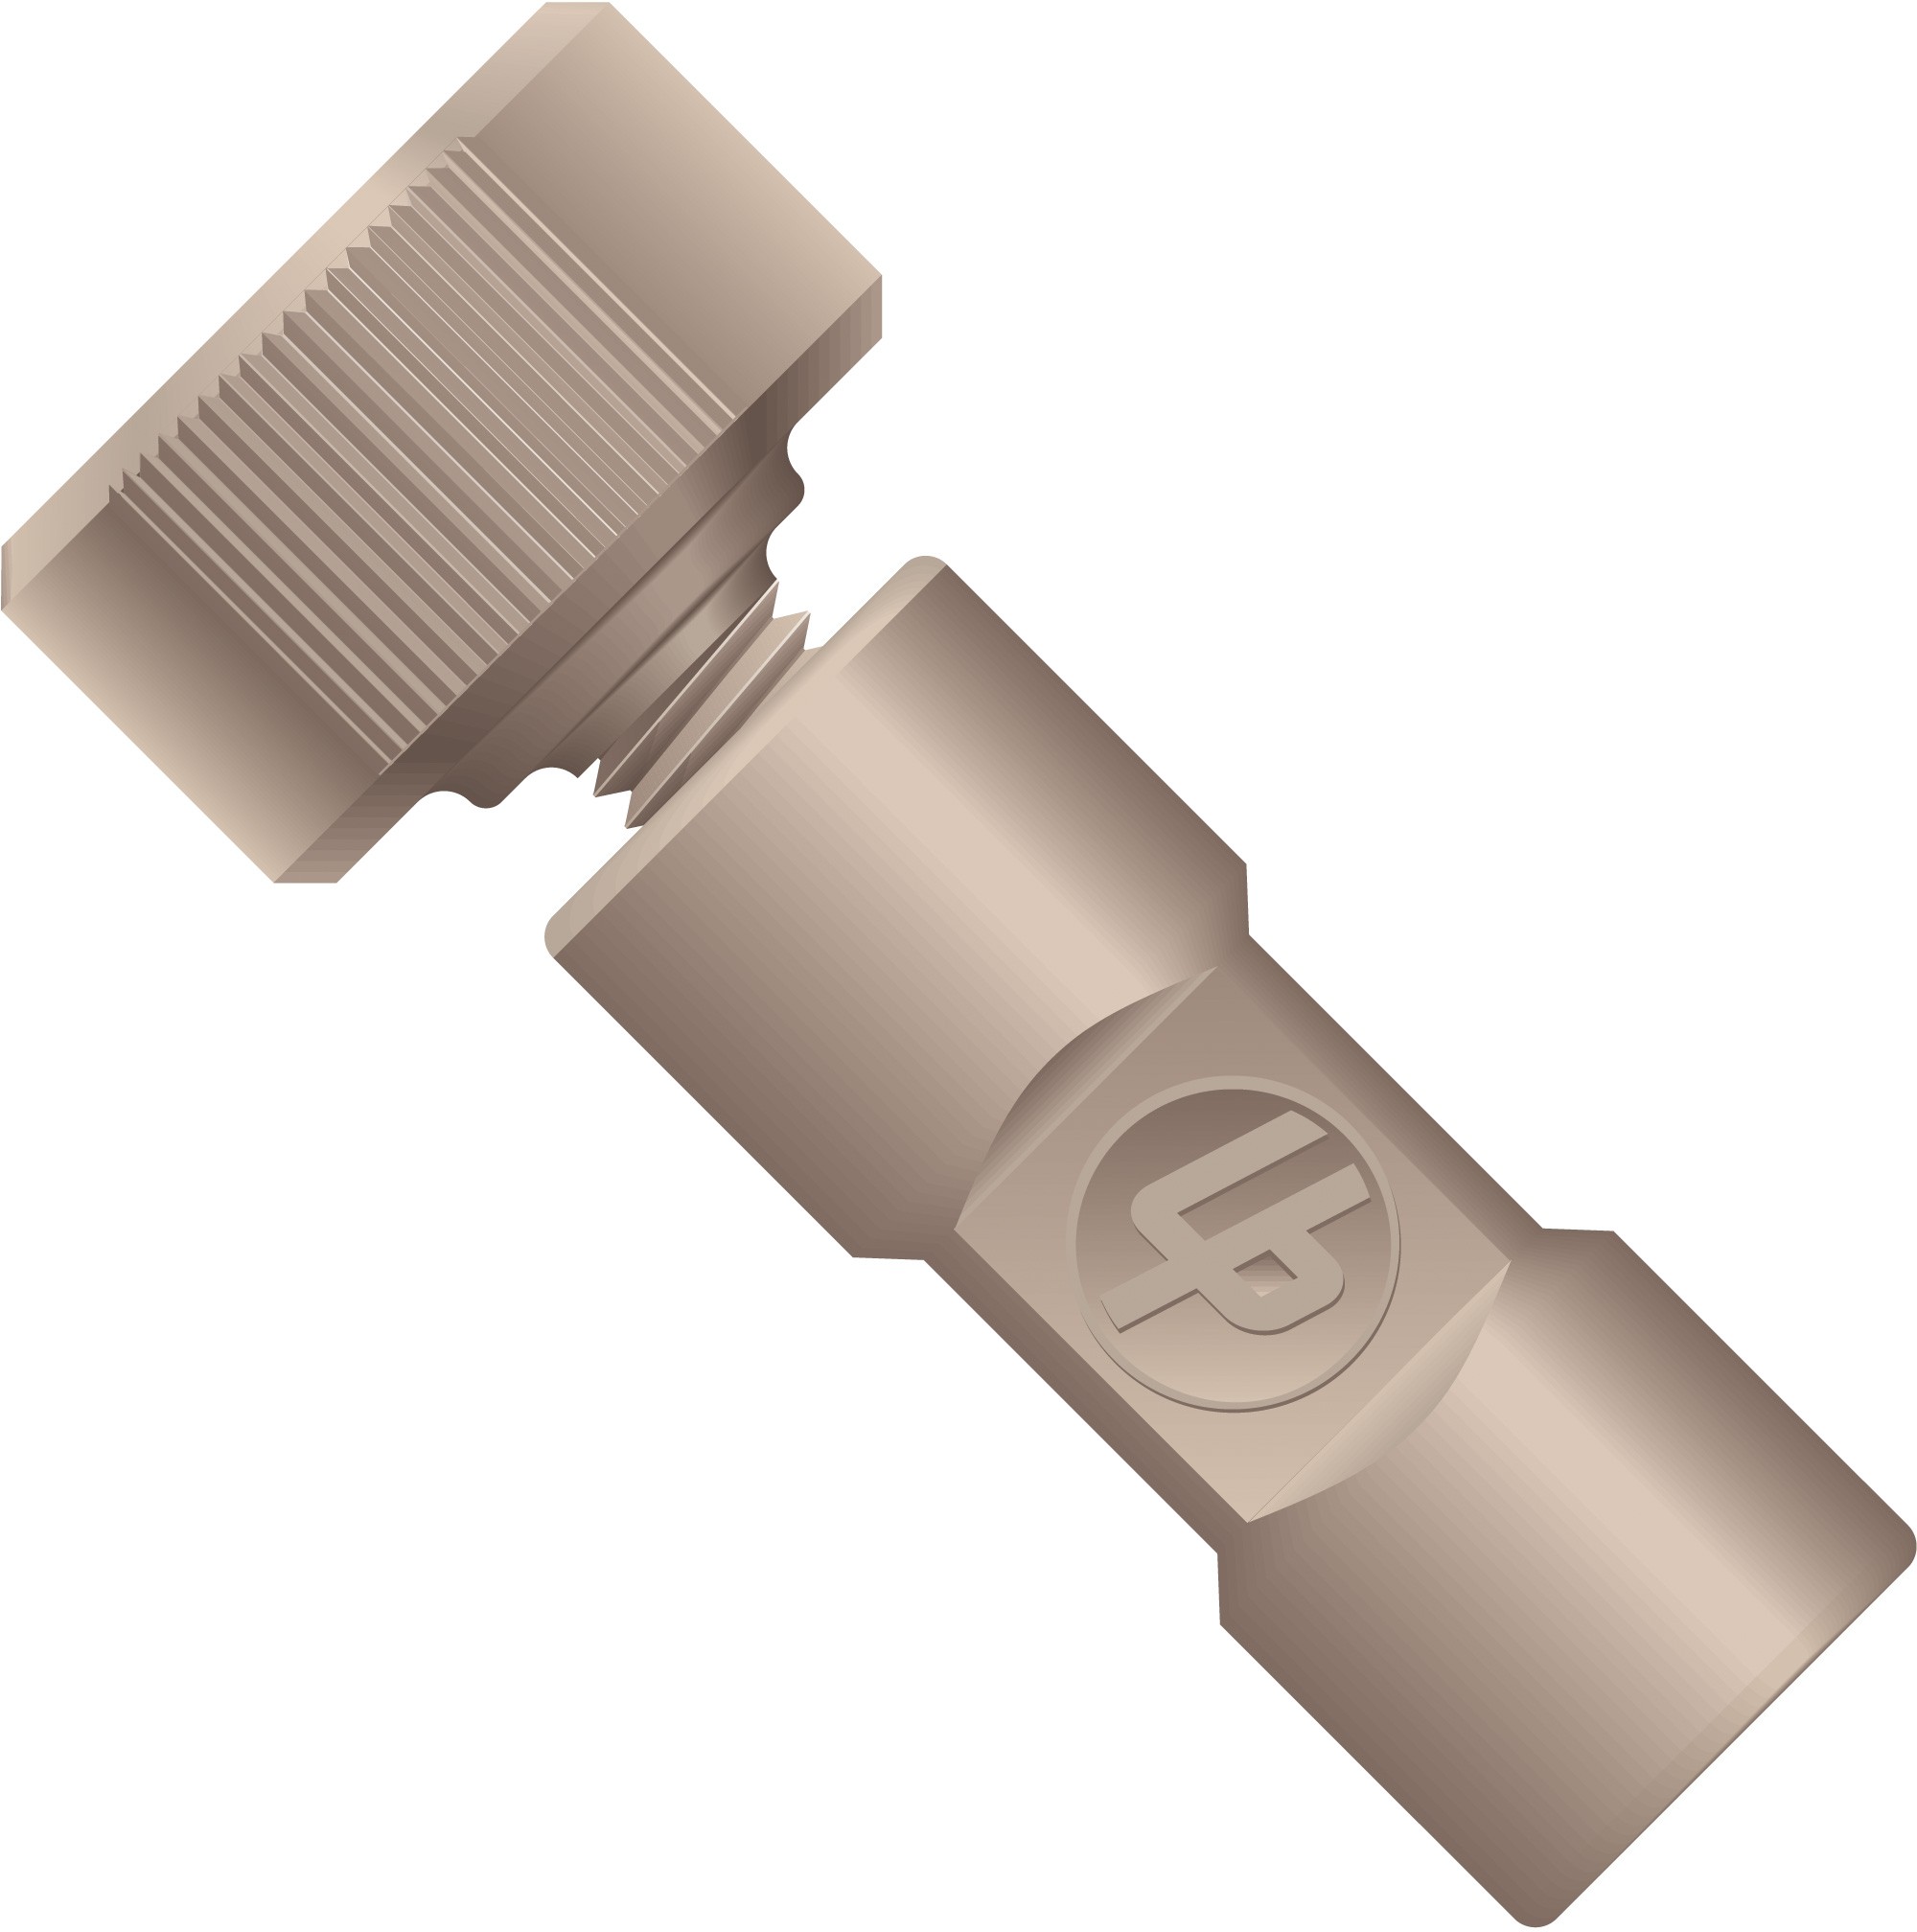 Adapters & Connectors: Threaded  Adapter, 10-32 Coned (Female) to 1/4"-28 Flat Bottom (Female), PEEK